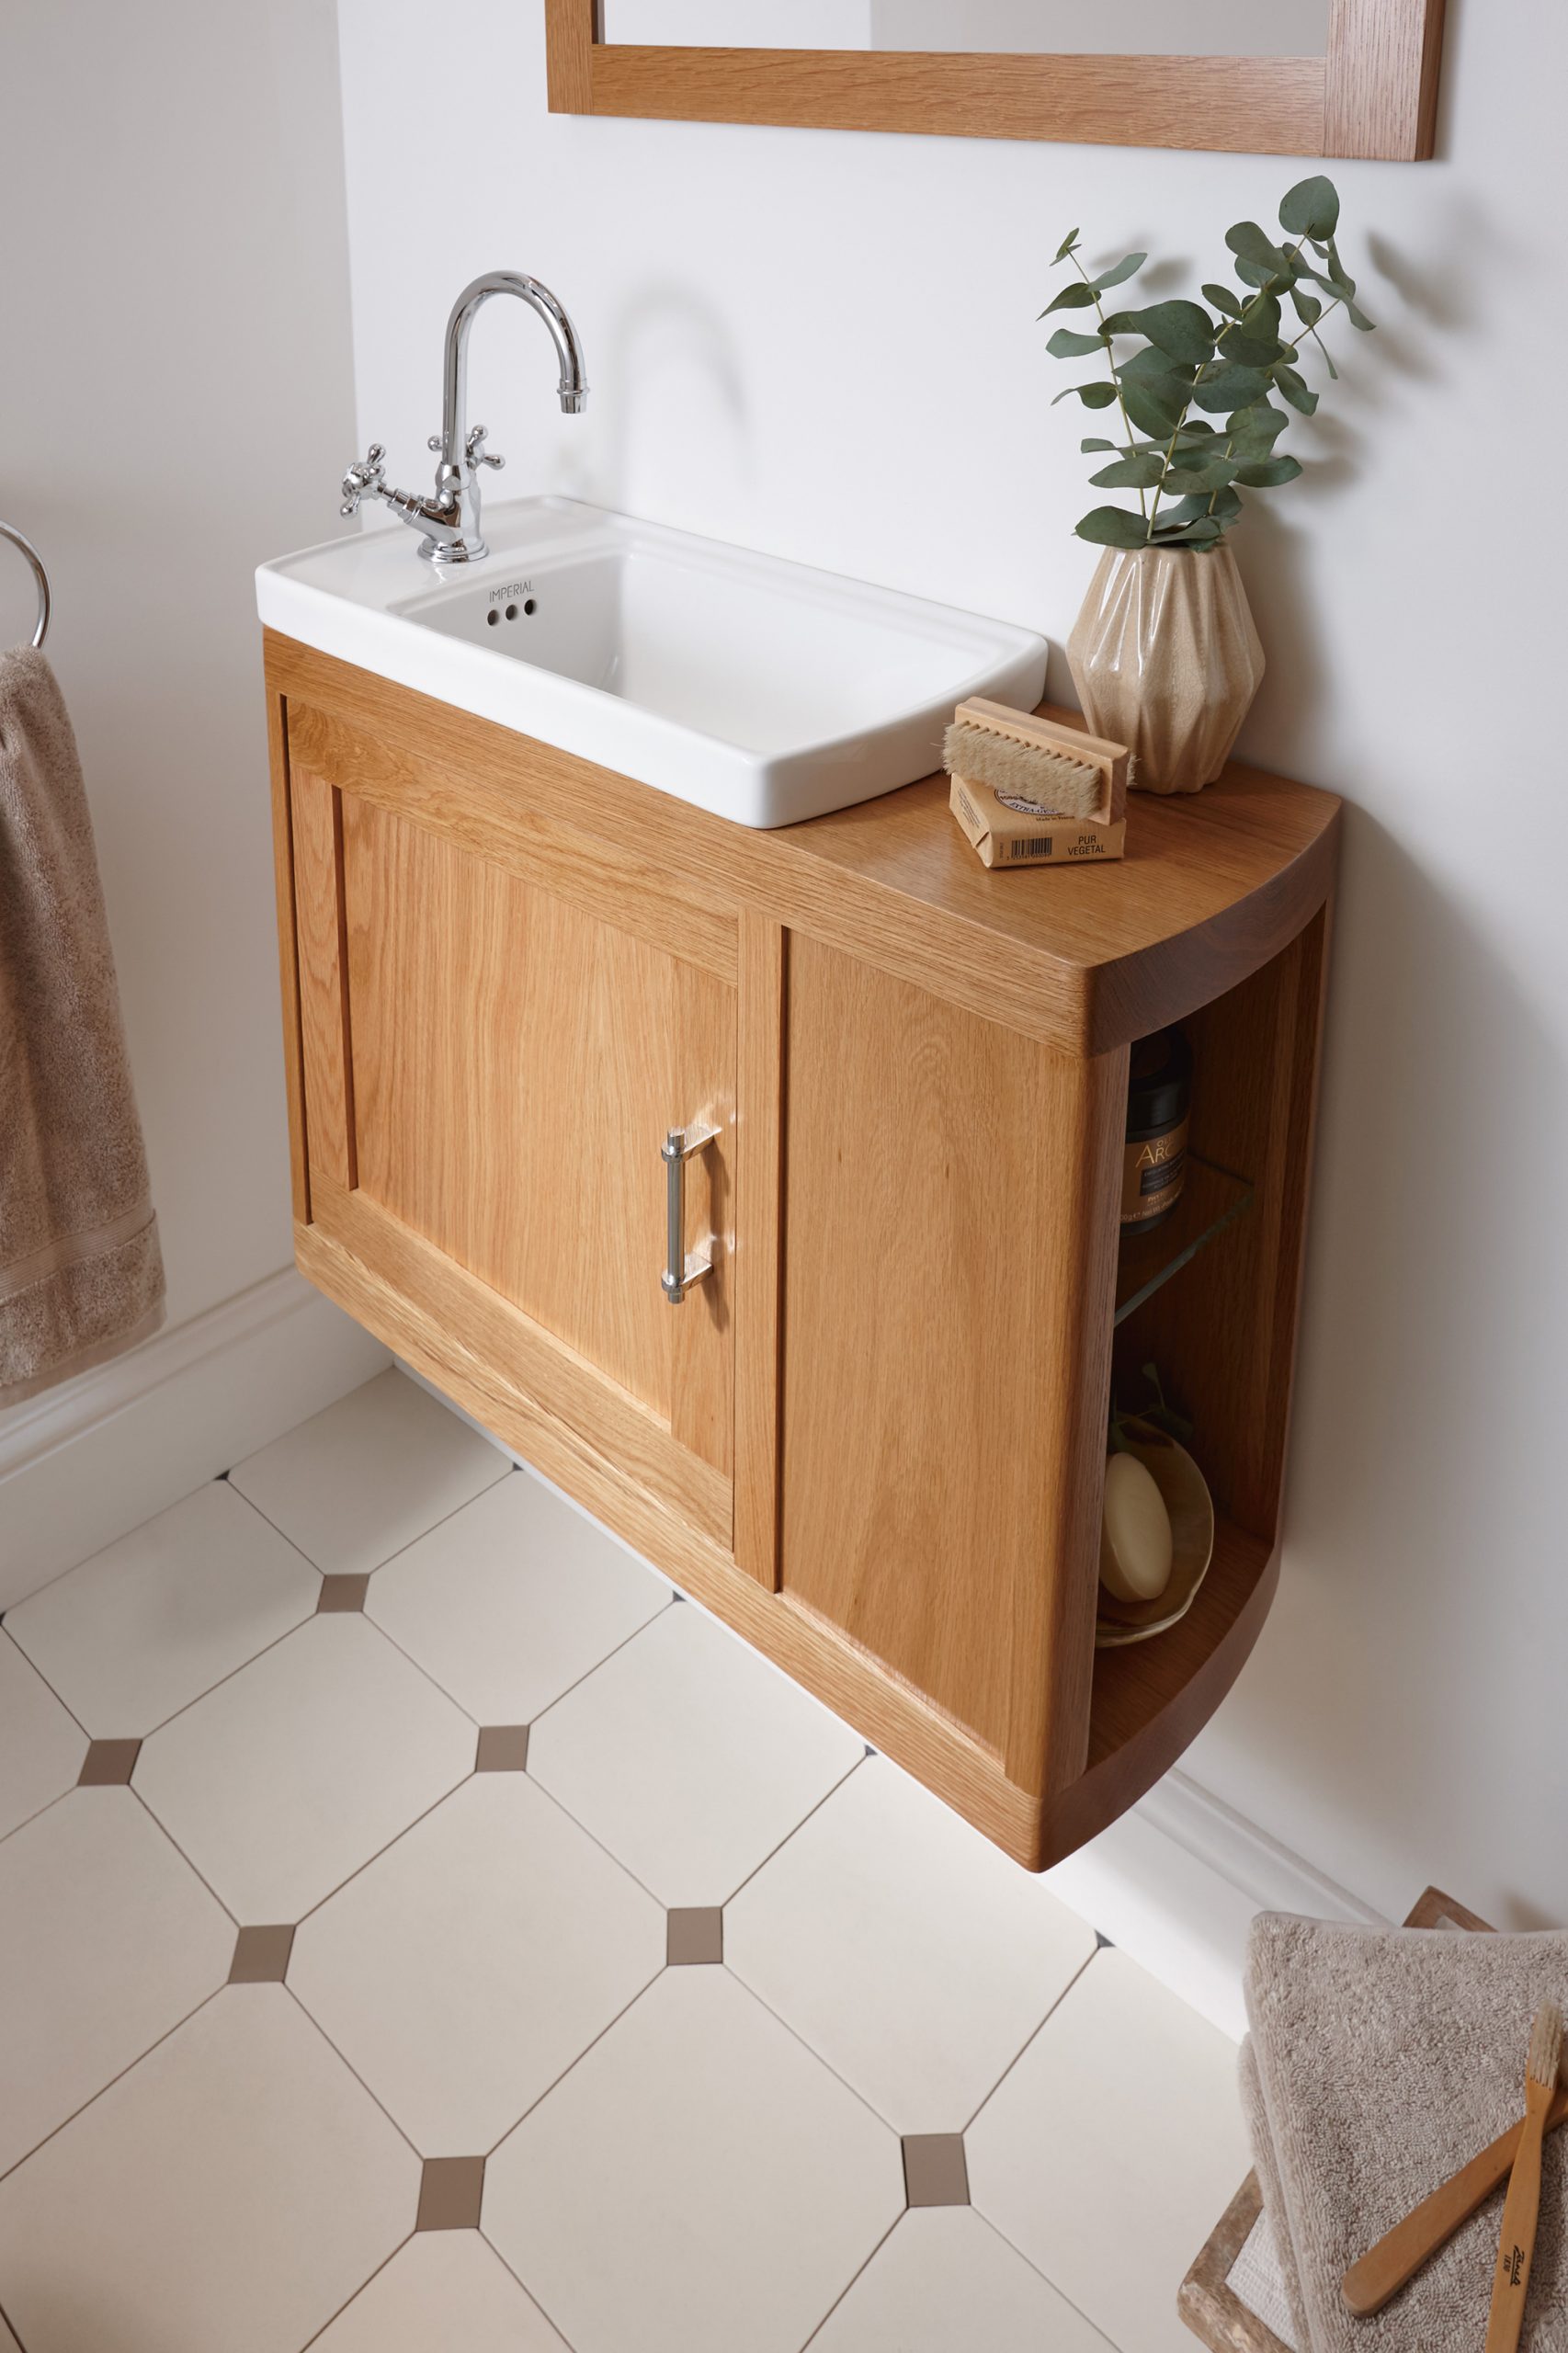 ‘Closet Genius’ with Radcliffe cloakroom furniture by Imperial Bathrooms @ImpBath